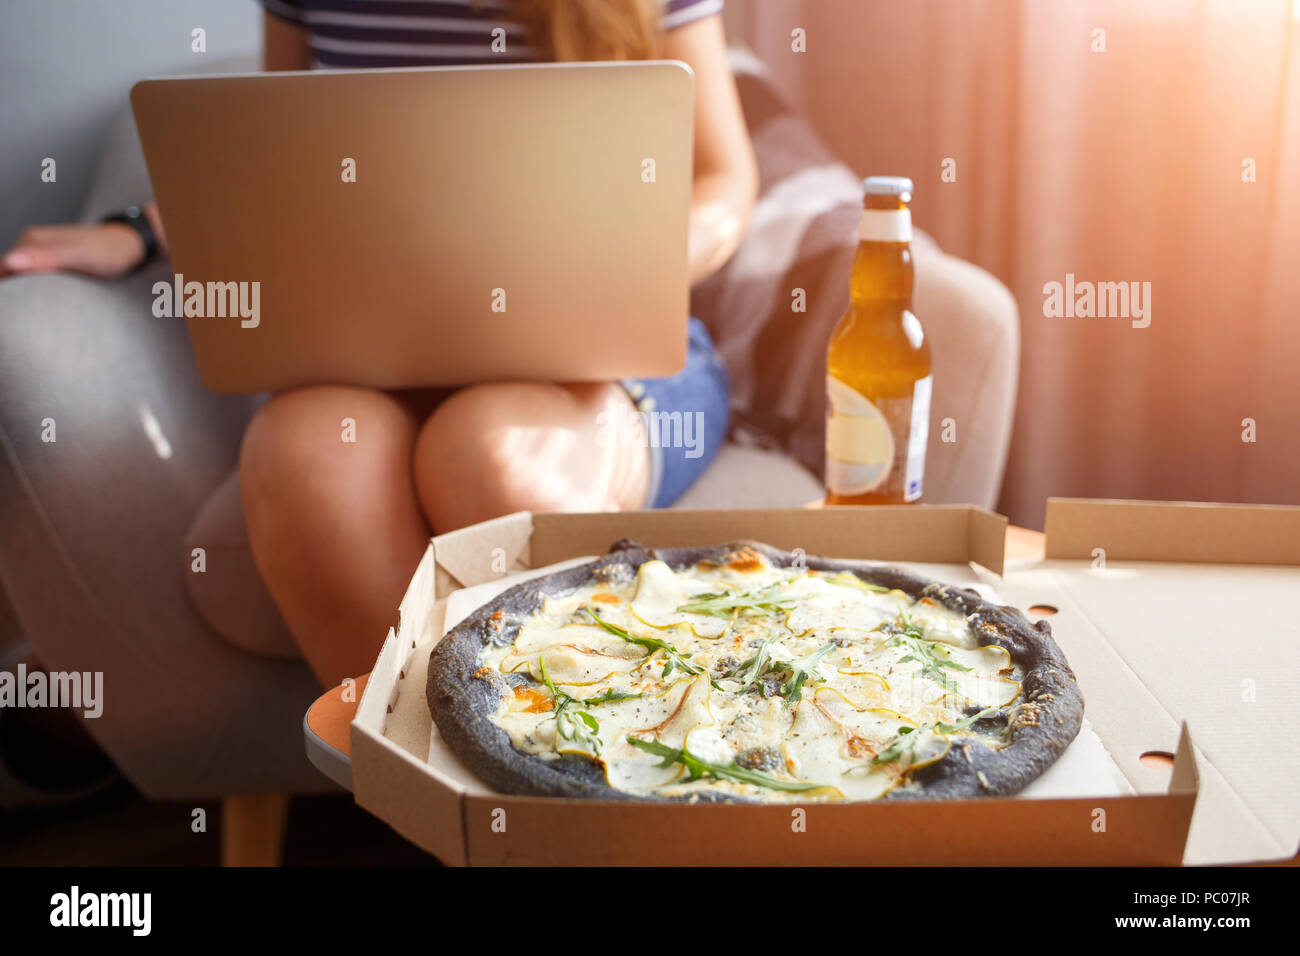 Young woman working on laptop with delivered pizza Stock Photo